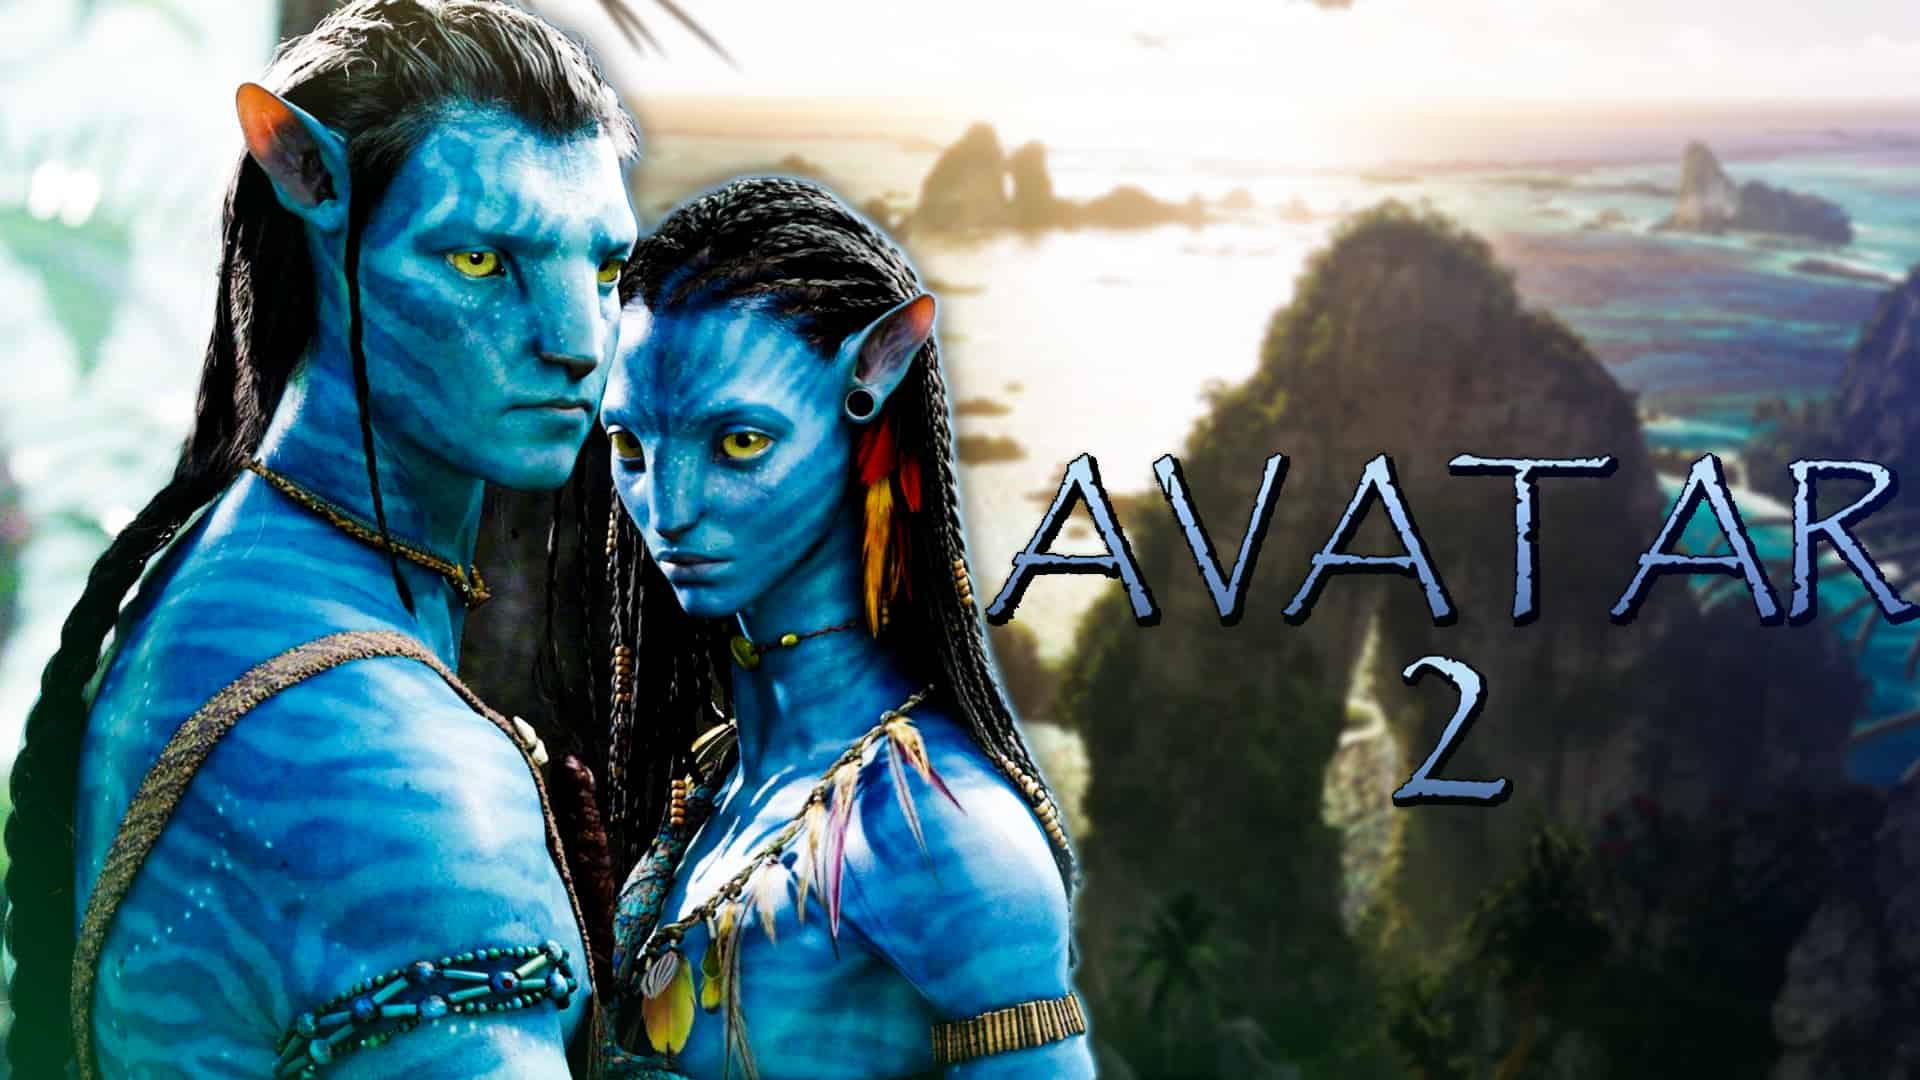 Avatar 2 trailer to air in theaters before Doctor Strange in the Multiverse of Madness